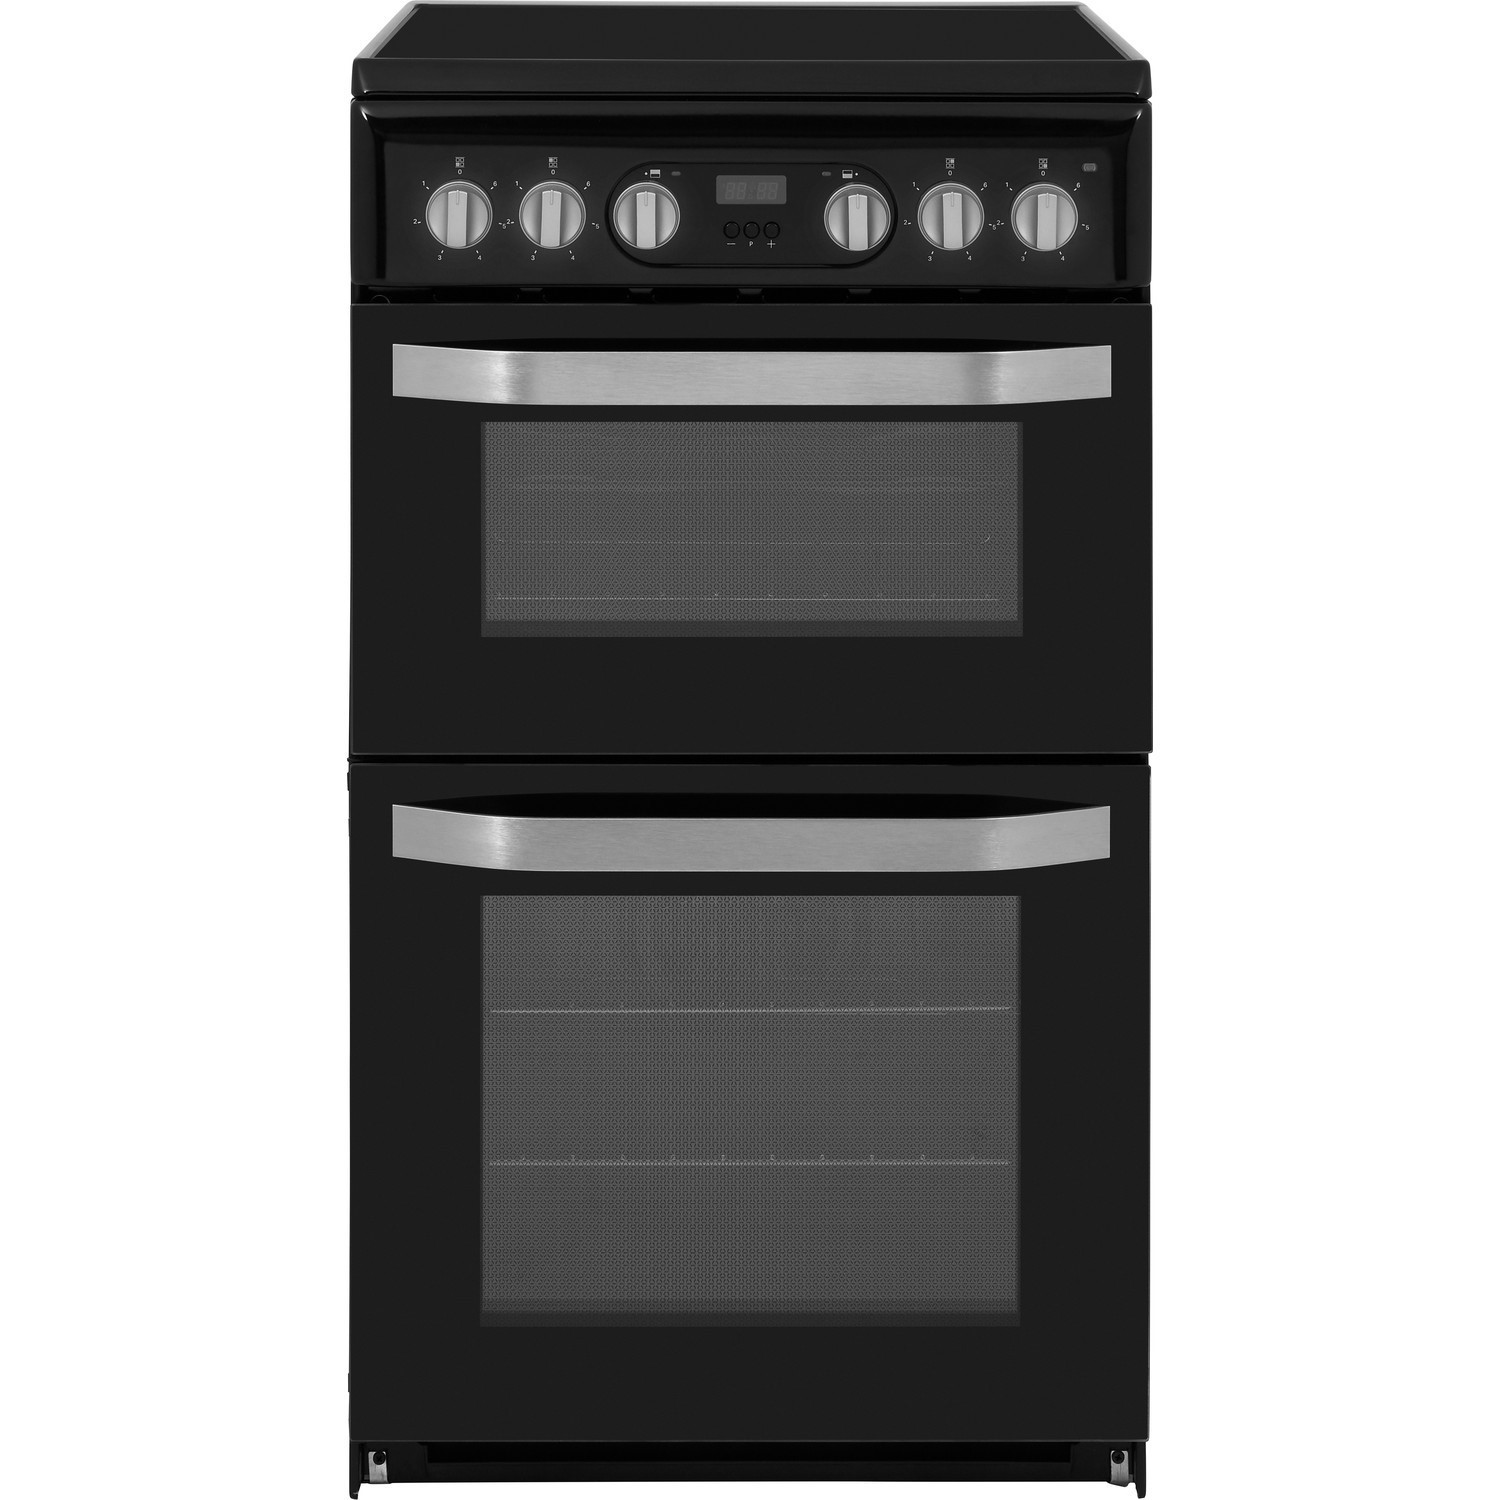 Hotpoint 50cm Double Oven Electric Cooker with Ceramic Hob - Black